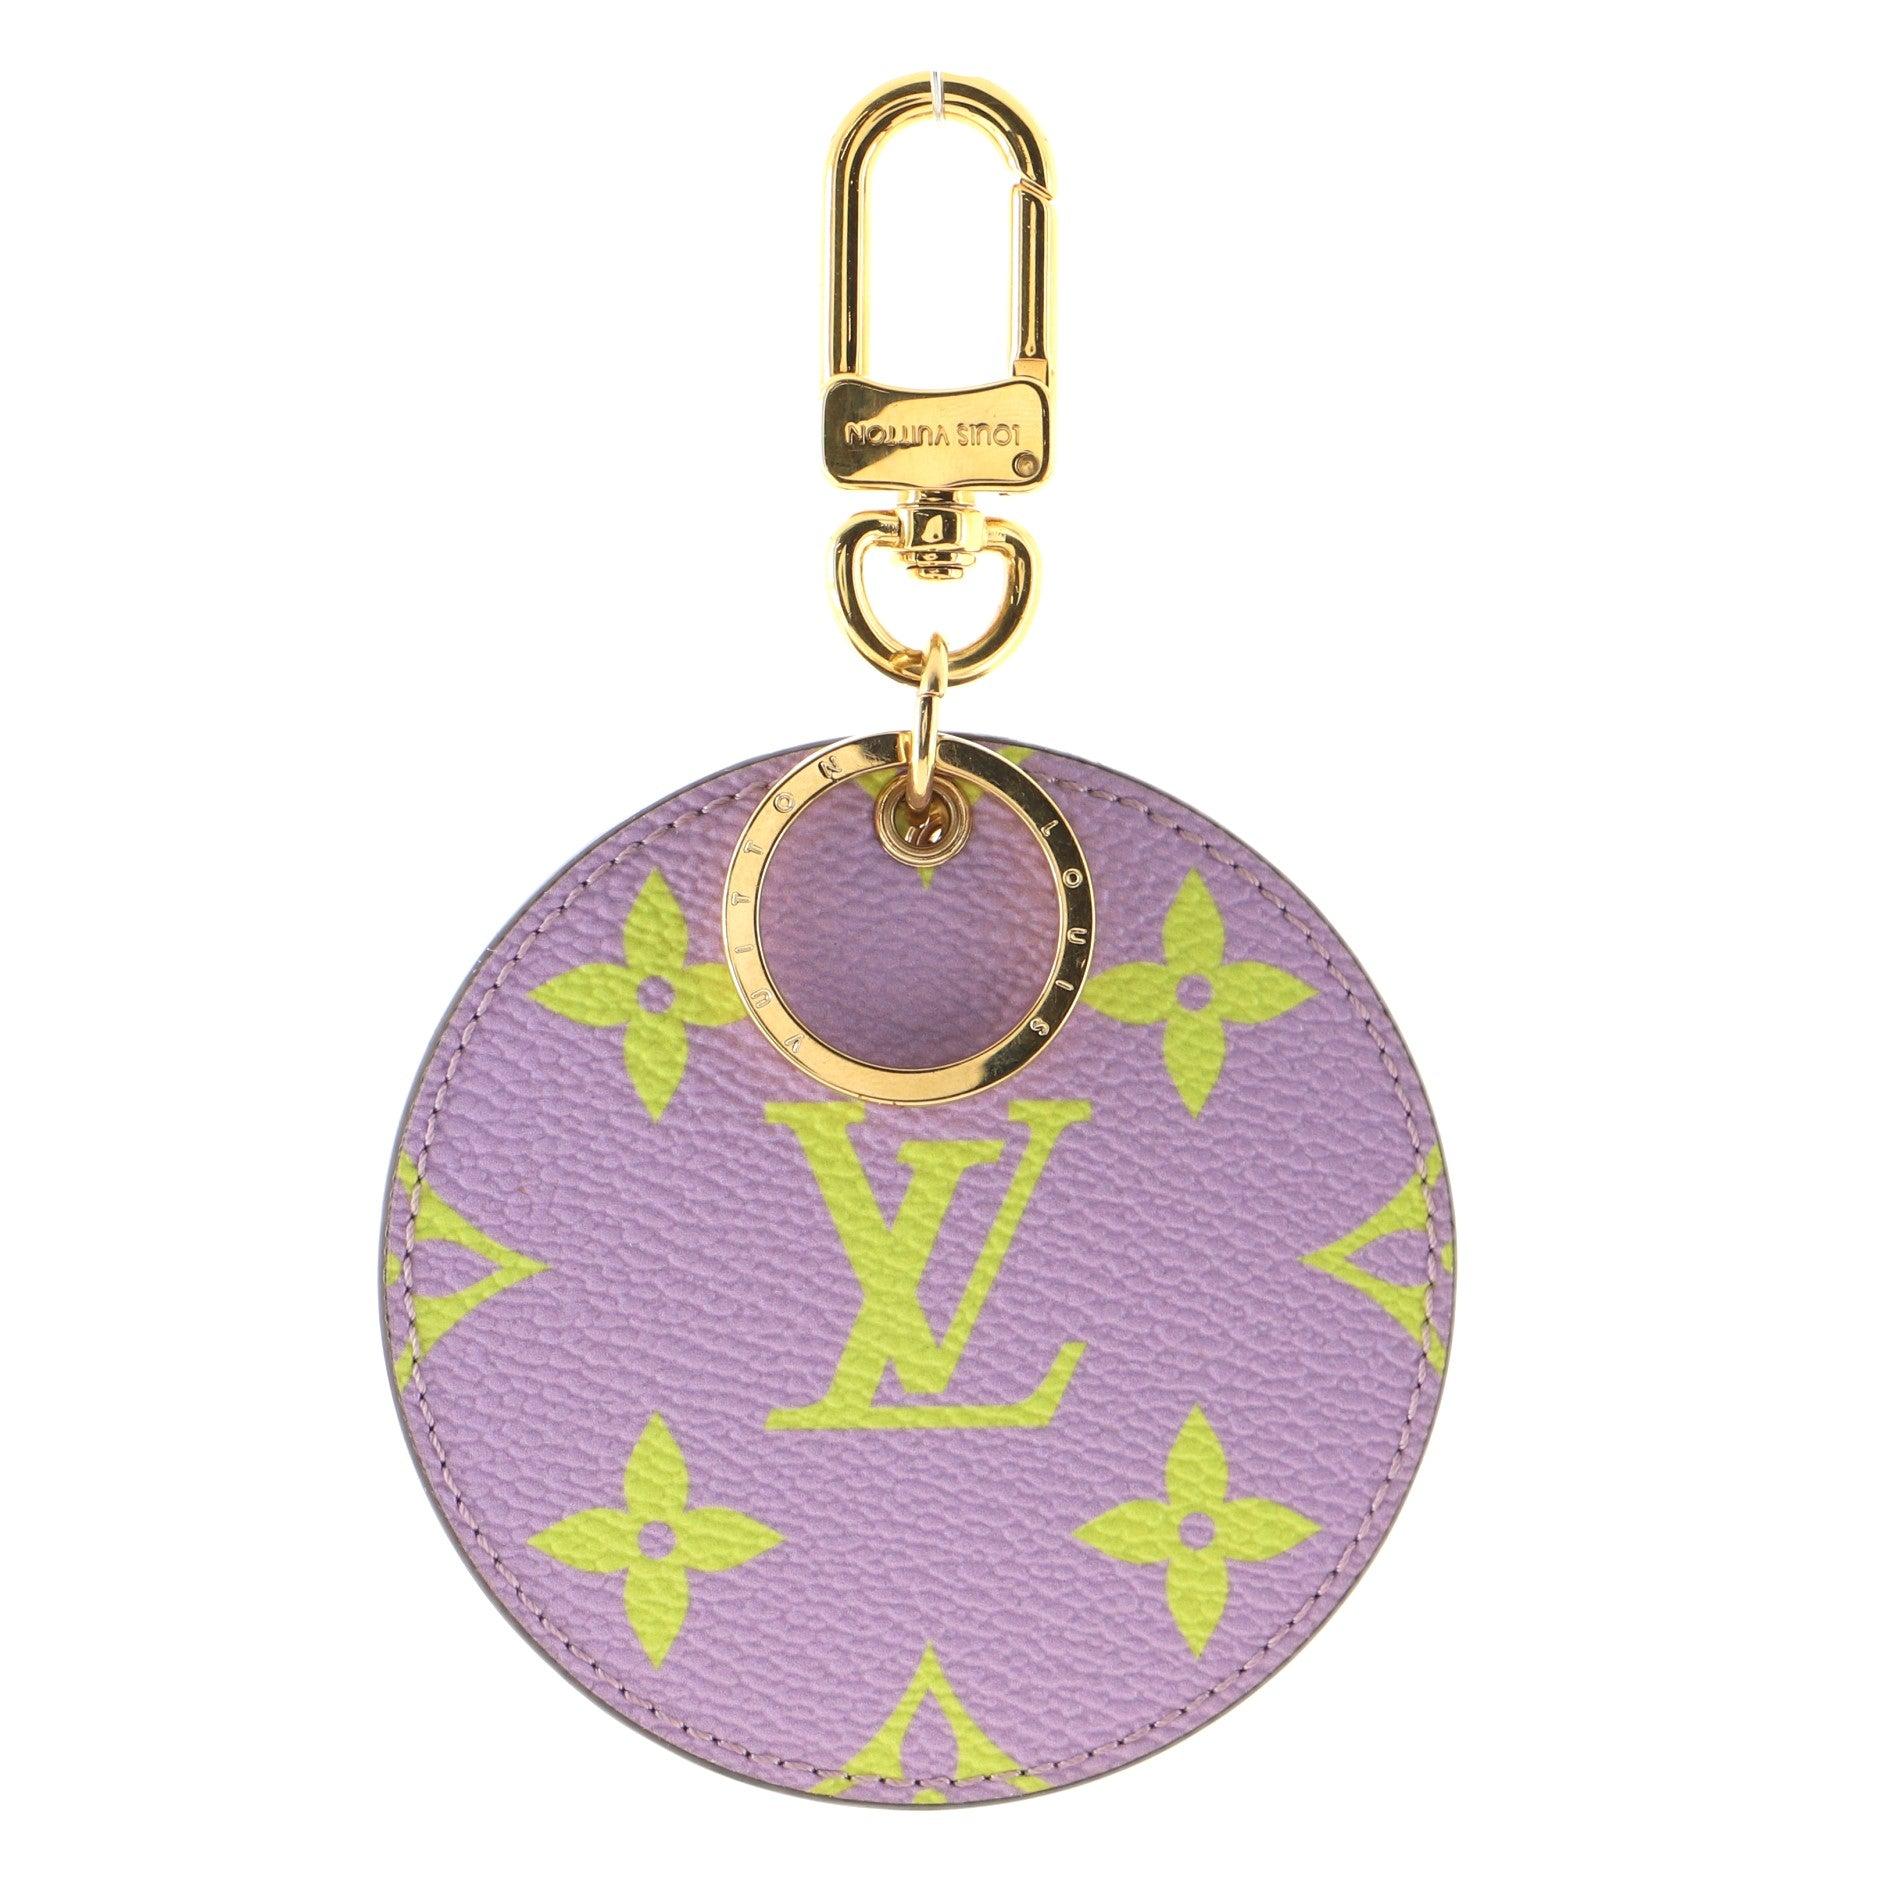 Louis Vuitton Multicolor Monogram Giant Limited Edition Round Illustre Keychain features the LV Initials in the center with contrasting pink and neon green, black and white LV Monogram and gold-tone hardware.

 

63771MSC